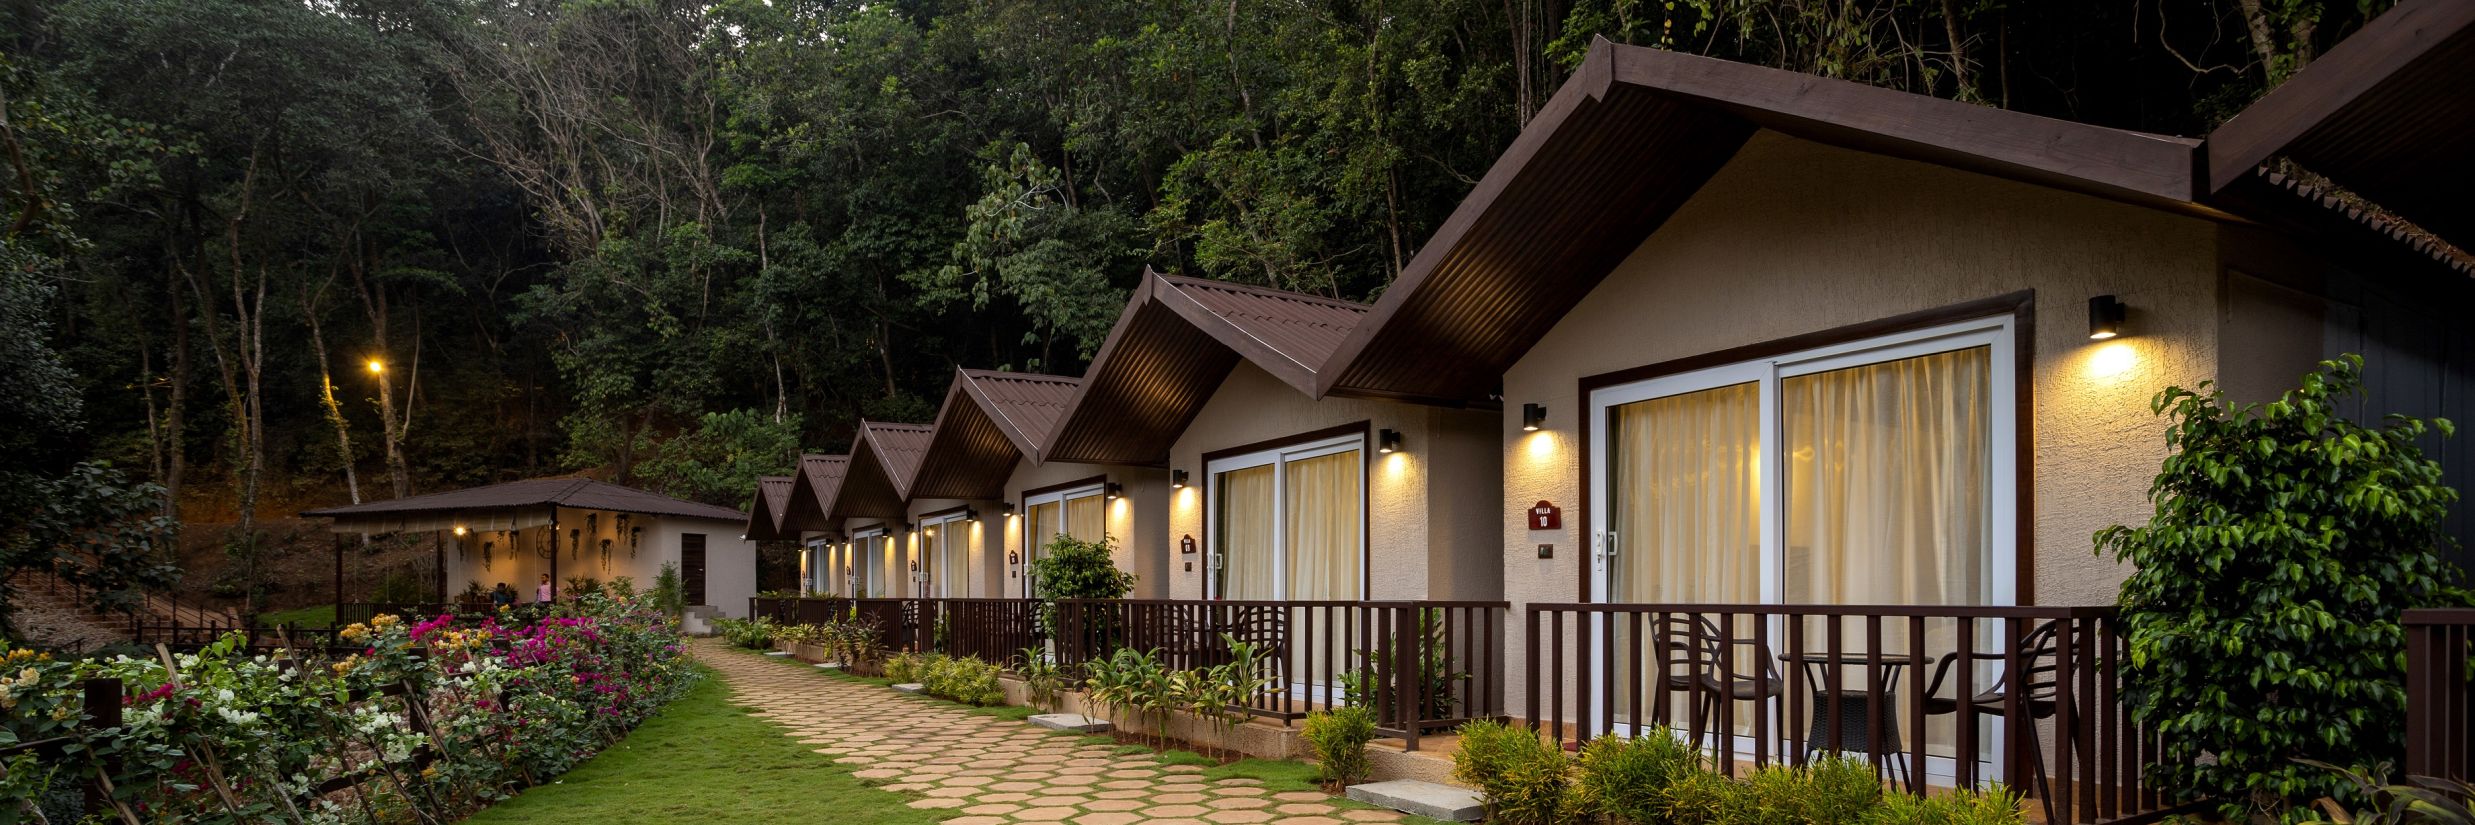 A well maintained corridor leading to the cottages illuminated by hanging lights - Stone Wood Nature Resort, Gokarna